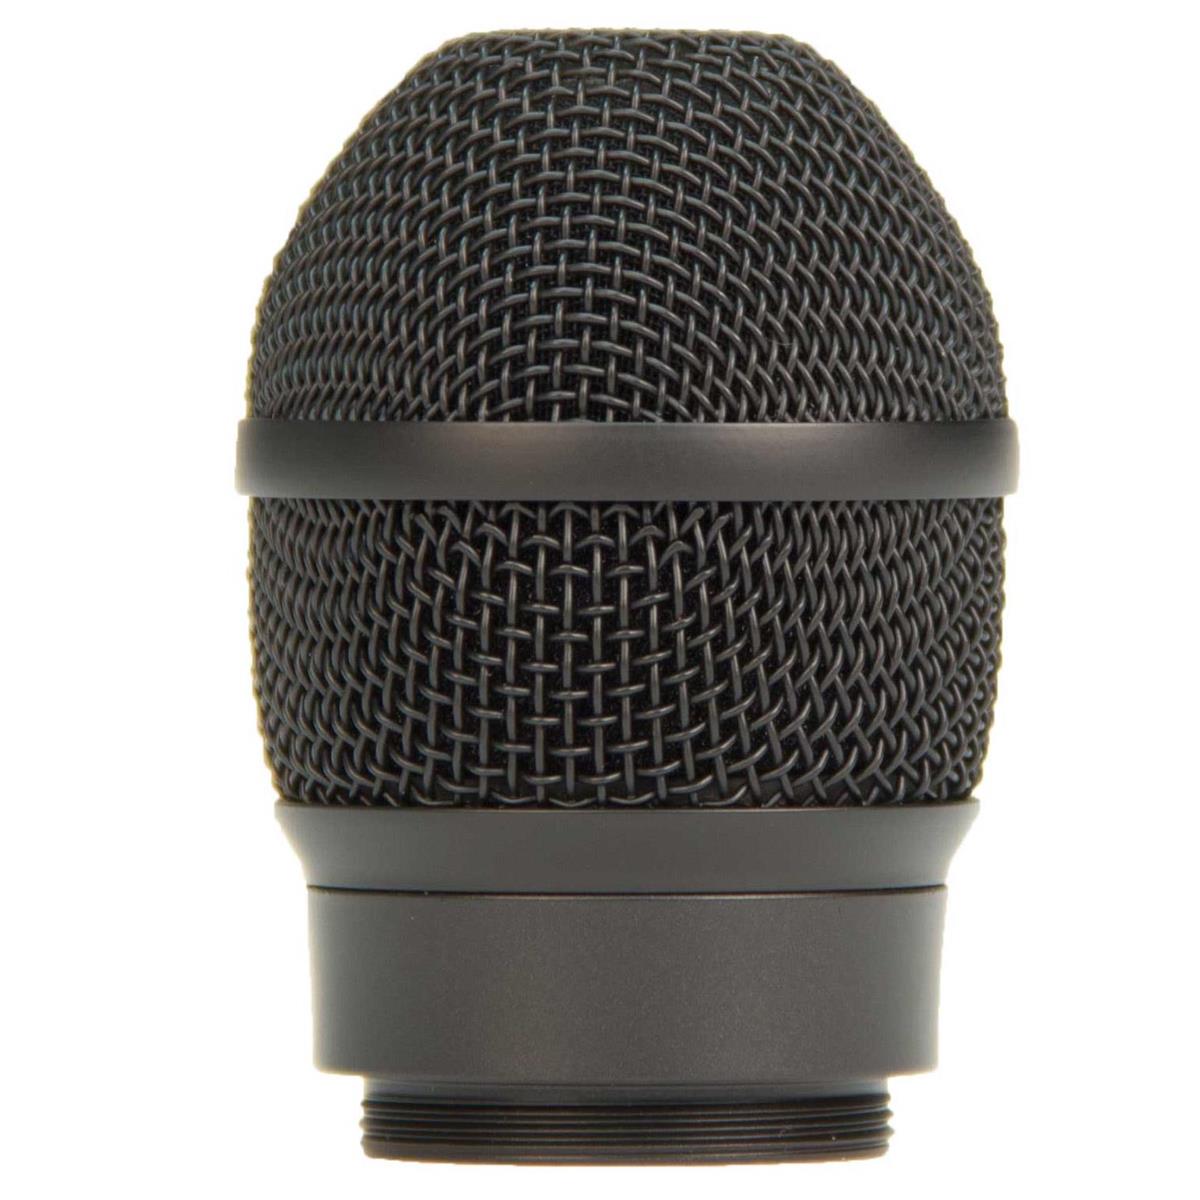 Image of Audix Wireless Modular Capsule Adapter with VX5 Condenser Capsule